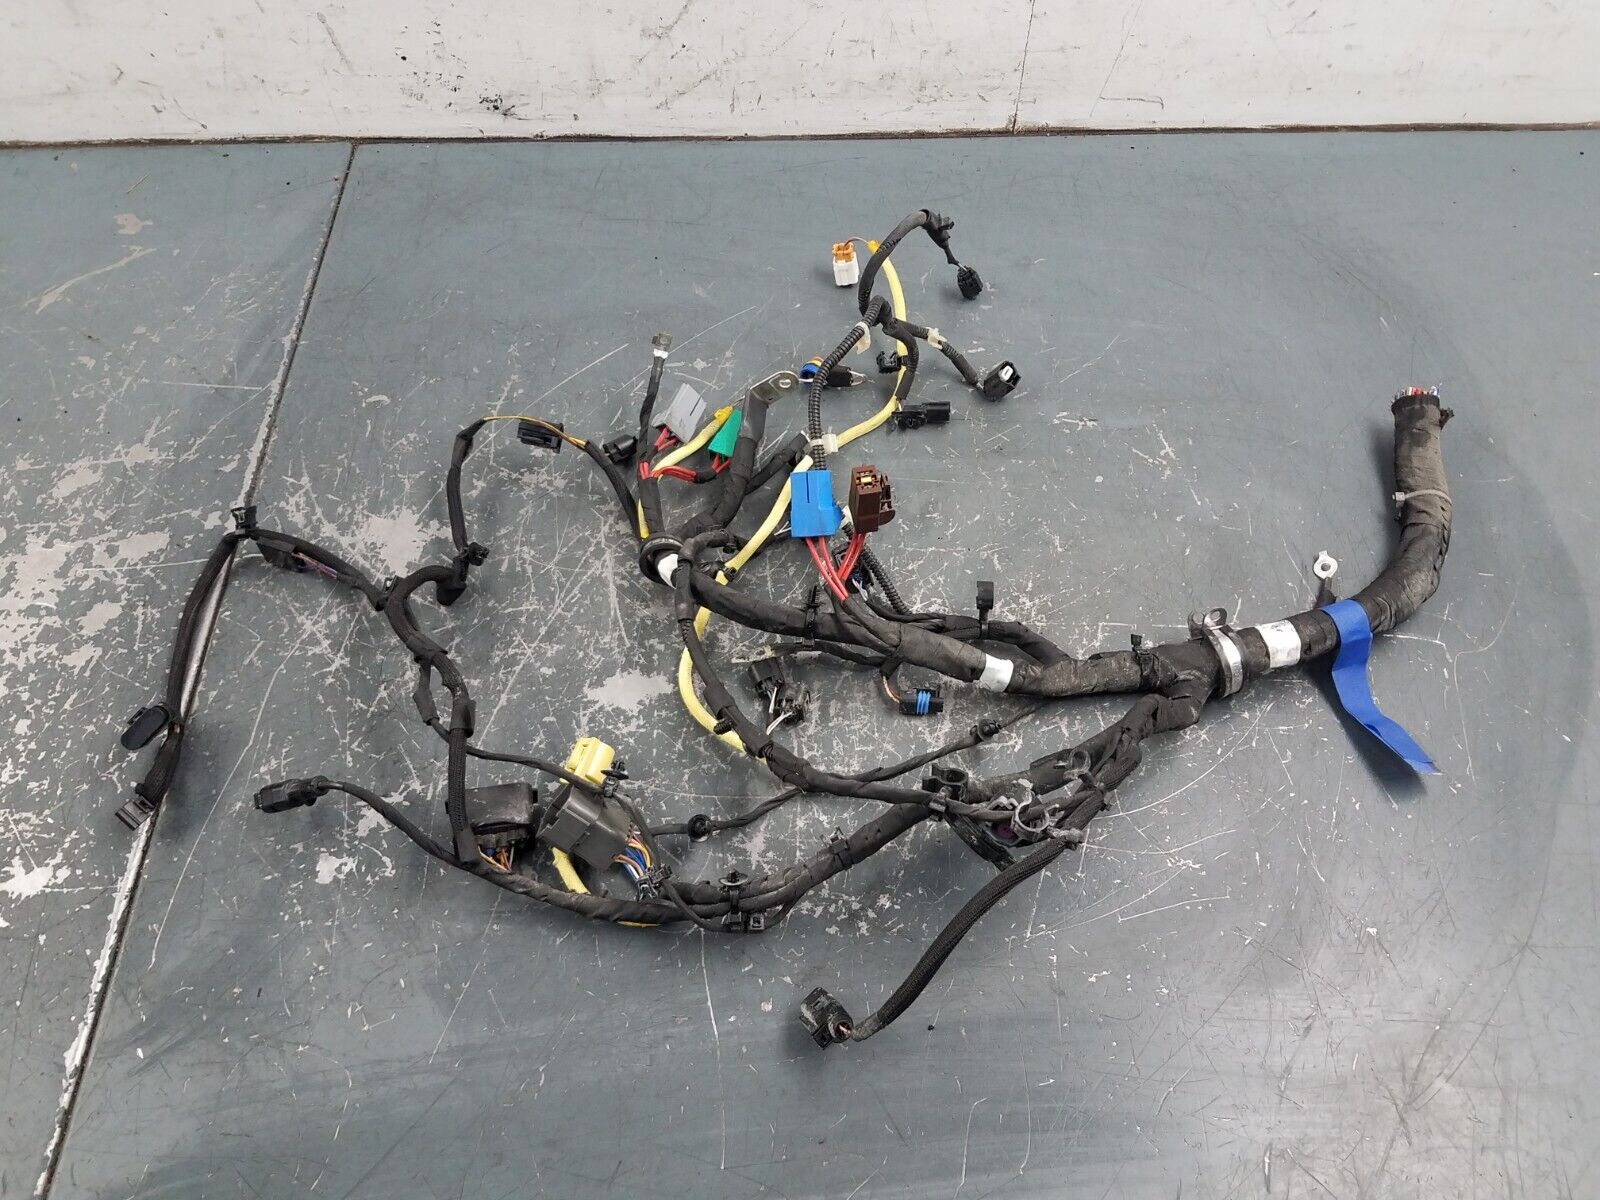 2021 McLaren 765LT Partial Chassis Wiring Harness - Damage #5597 E6